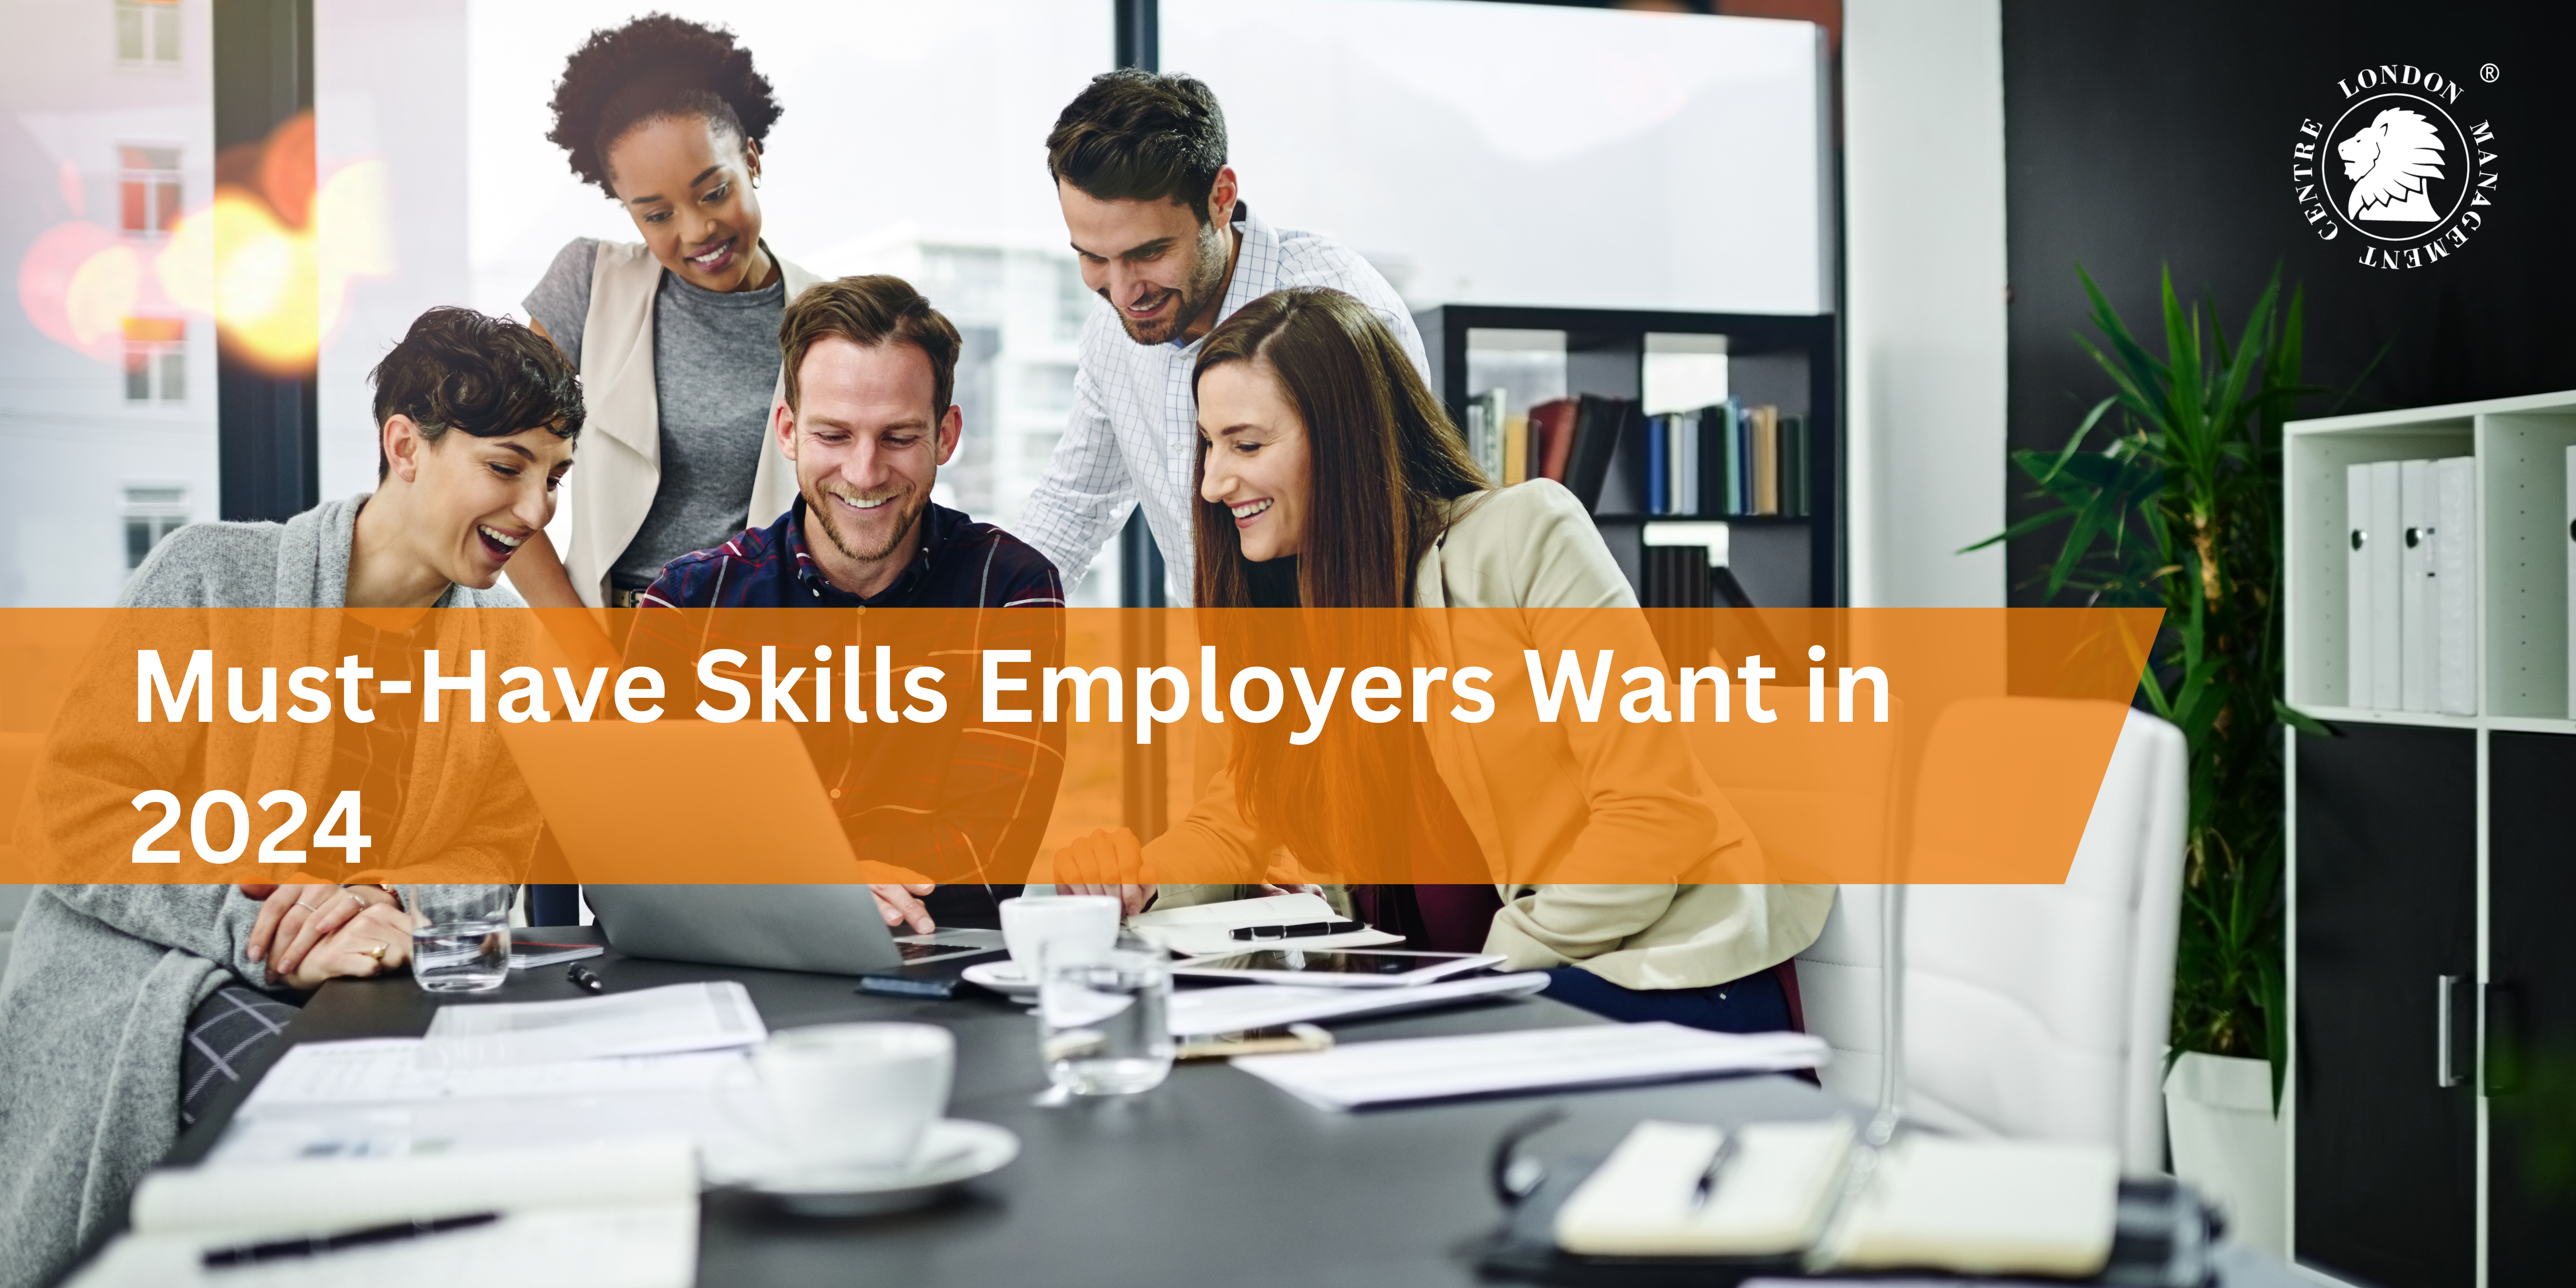 Must-Have Skills Employers Want in 2024